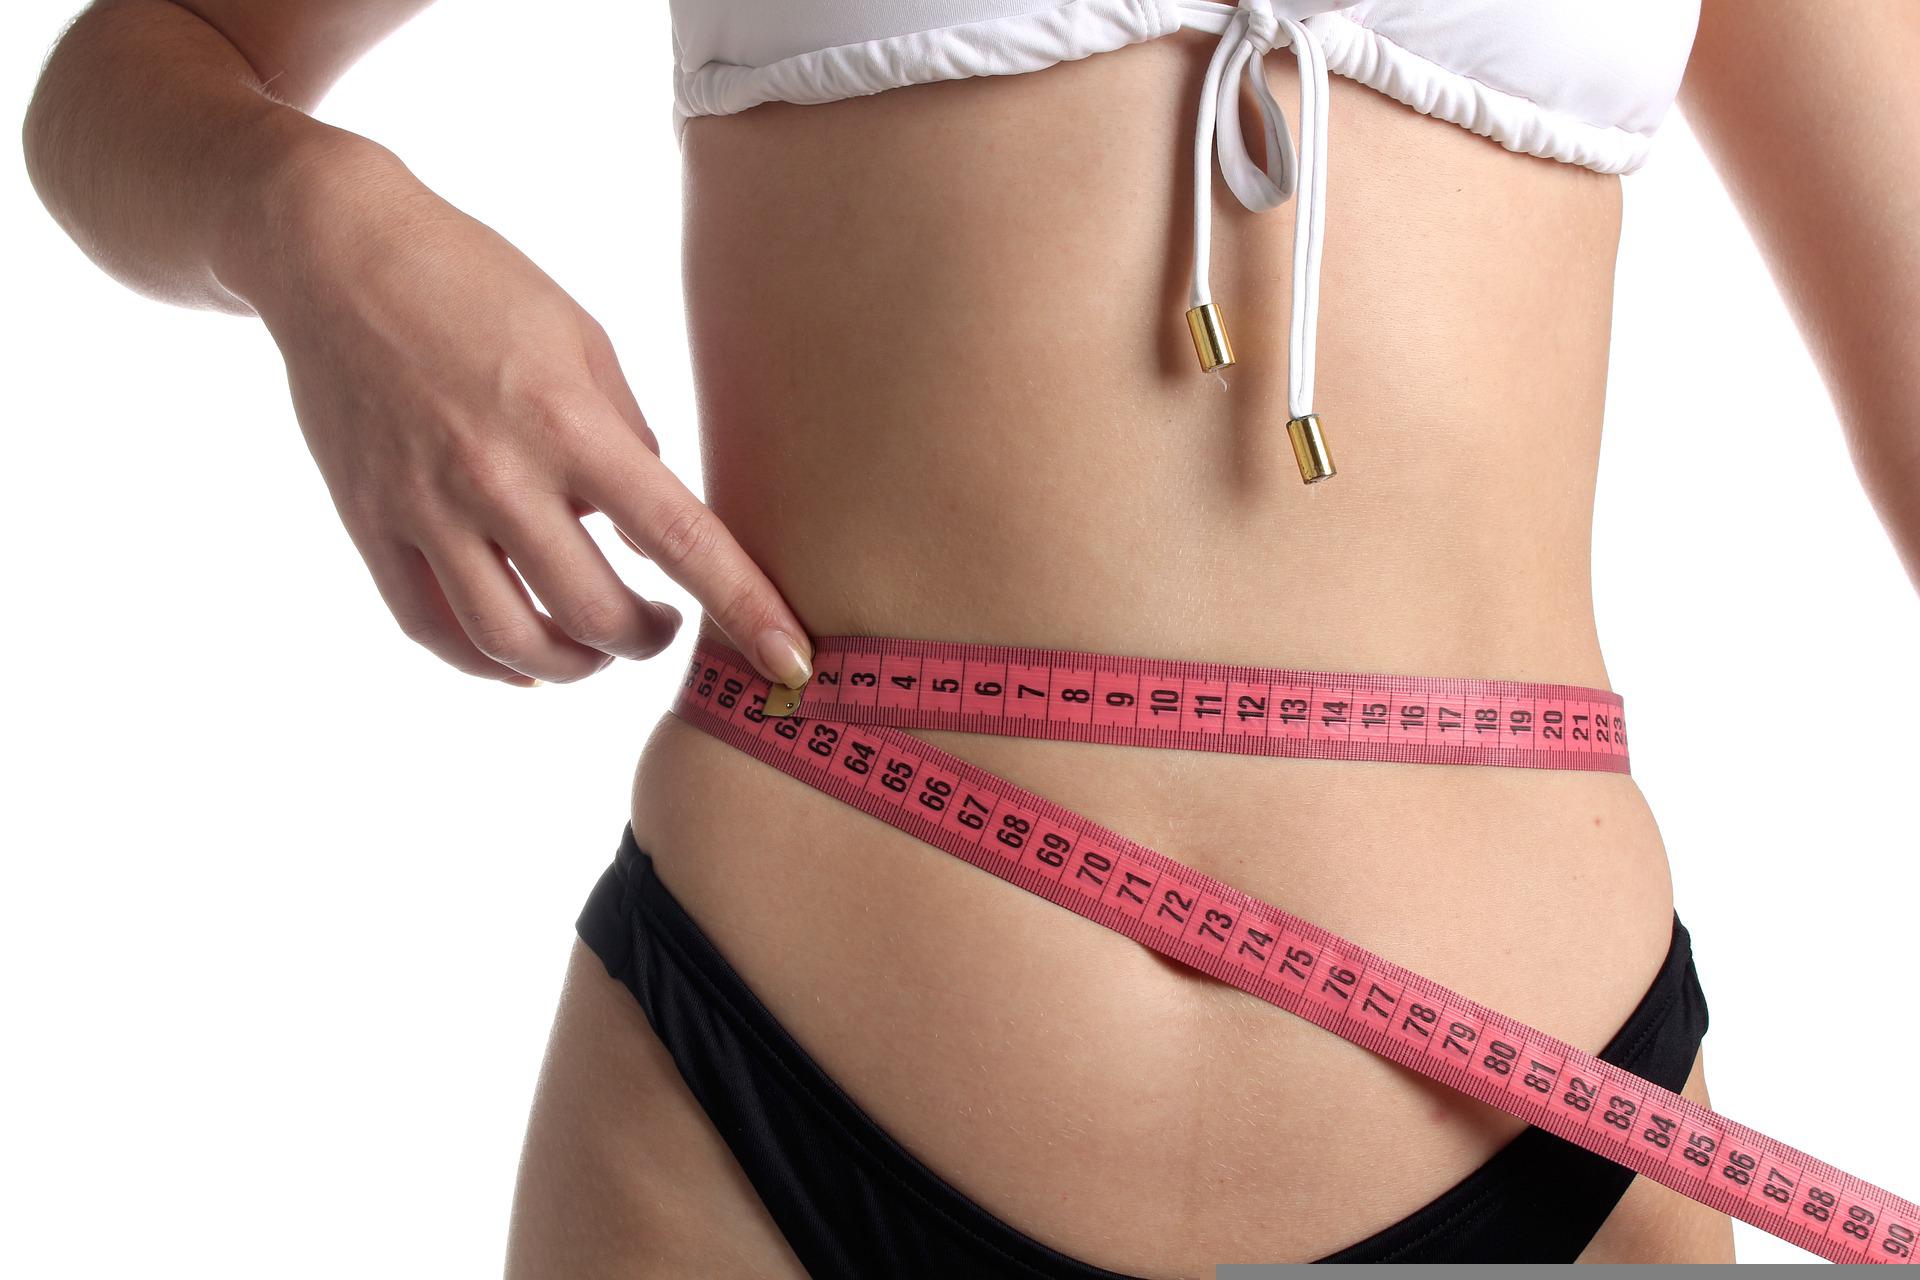 3 BEST AND ULTIMATE NATURAL DIETARY SUPPLEMENTS FOR WEIGHT LOSS